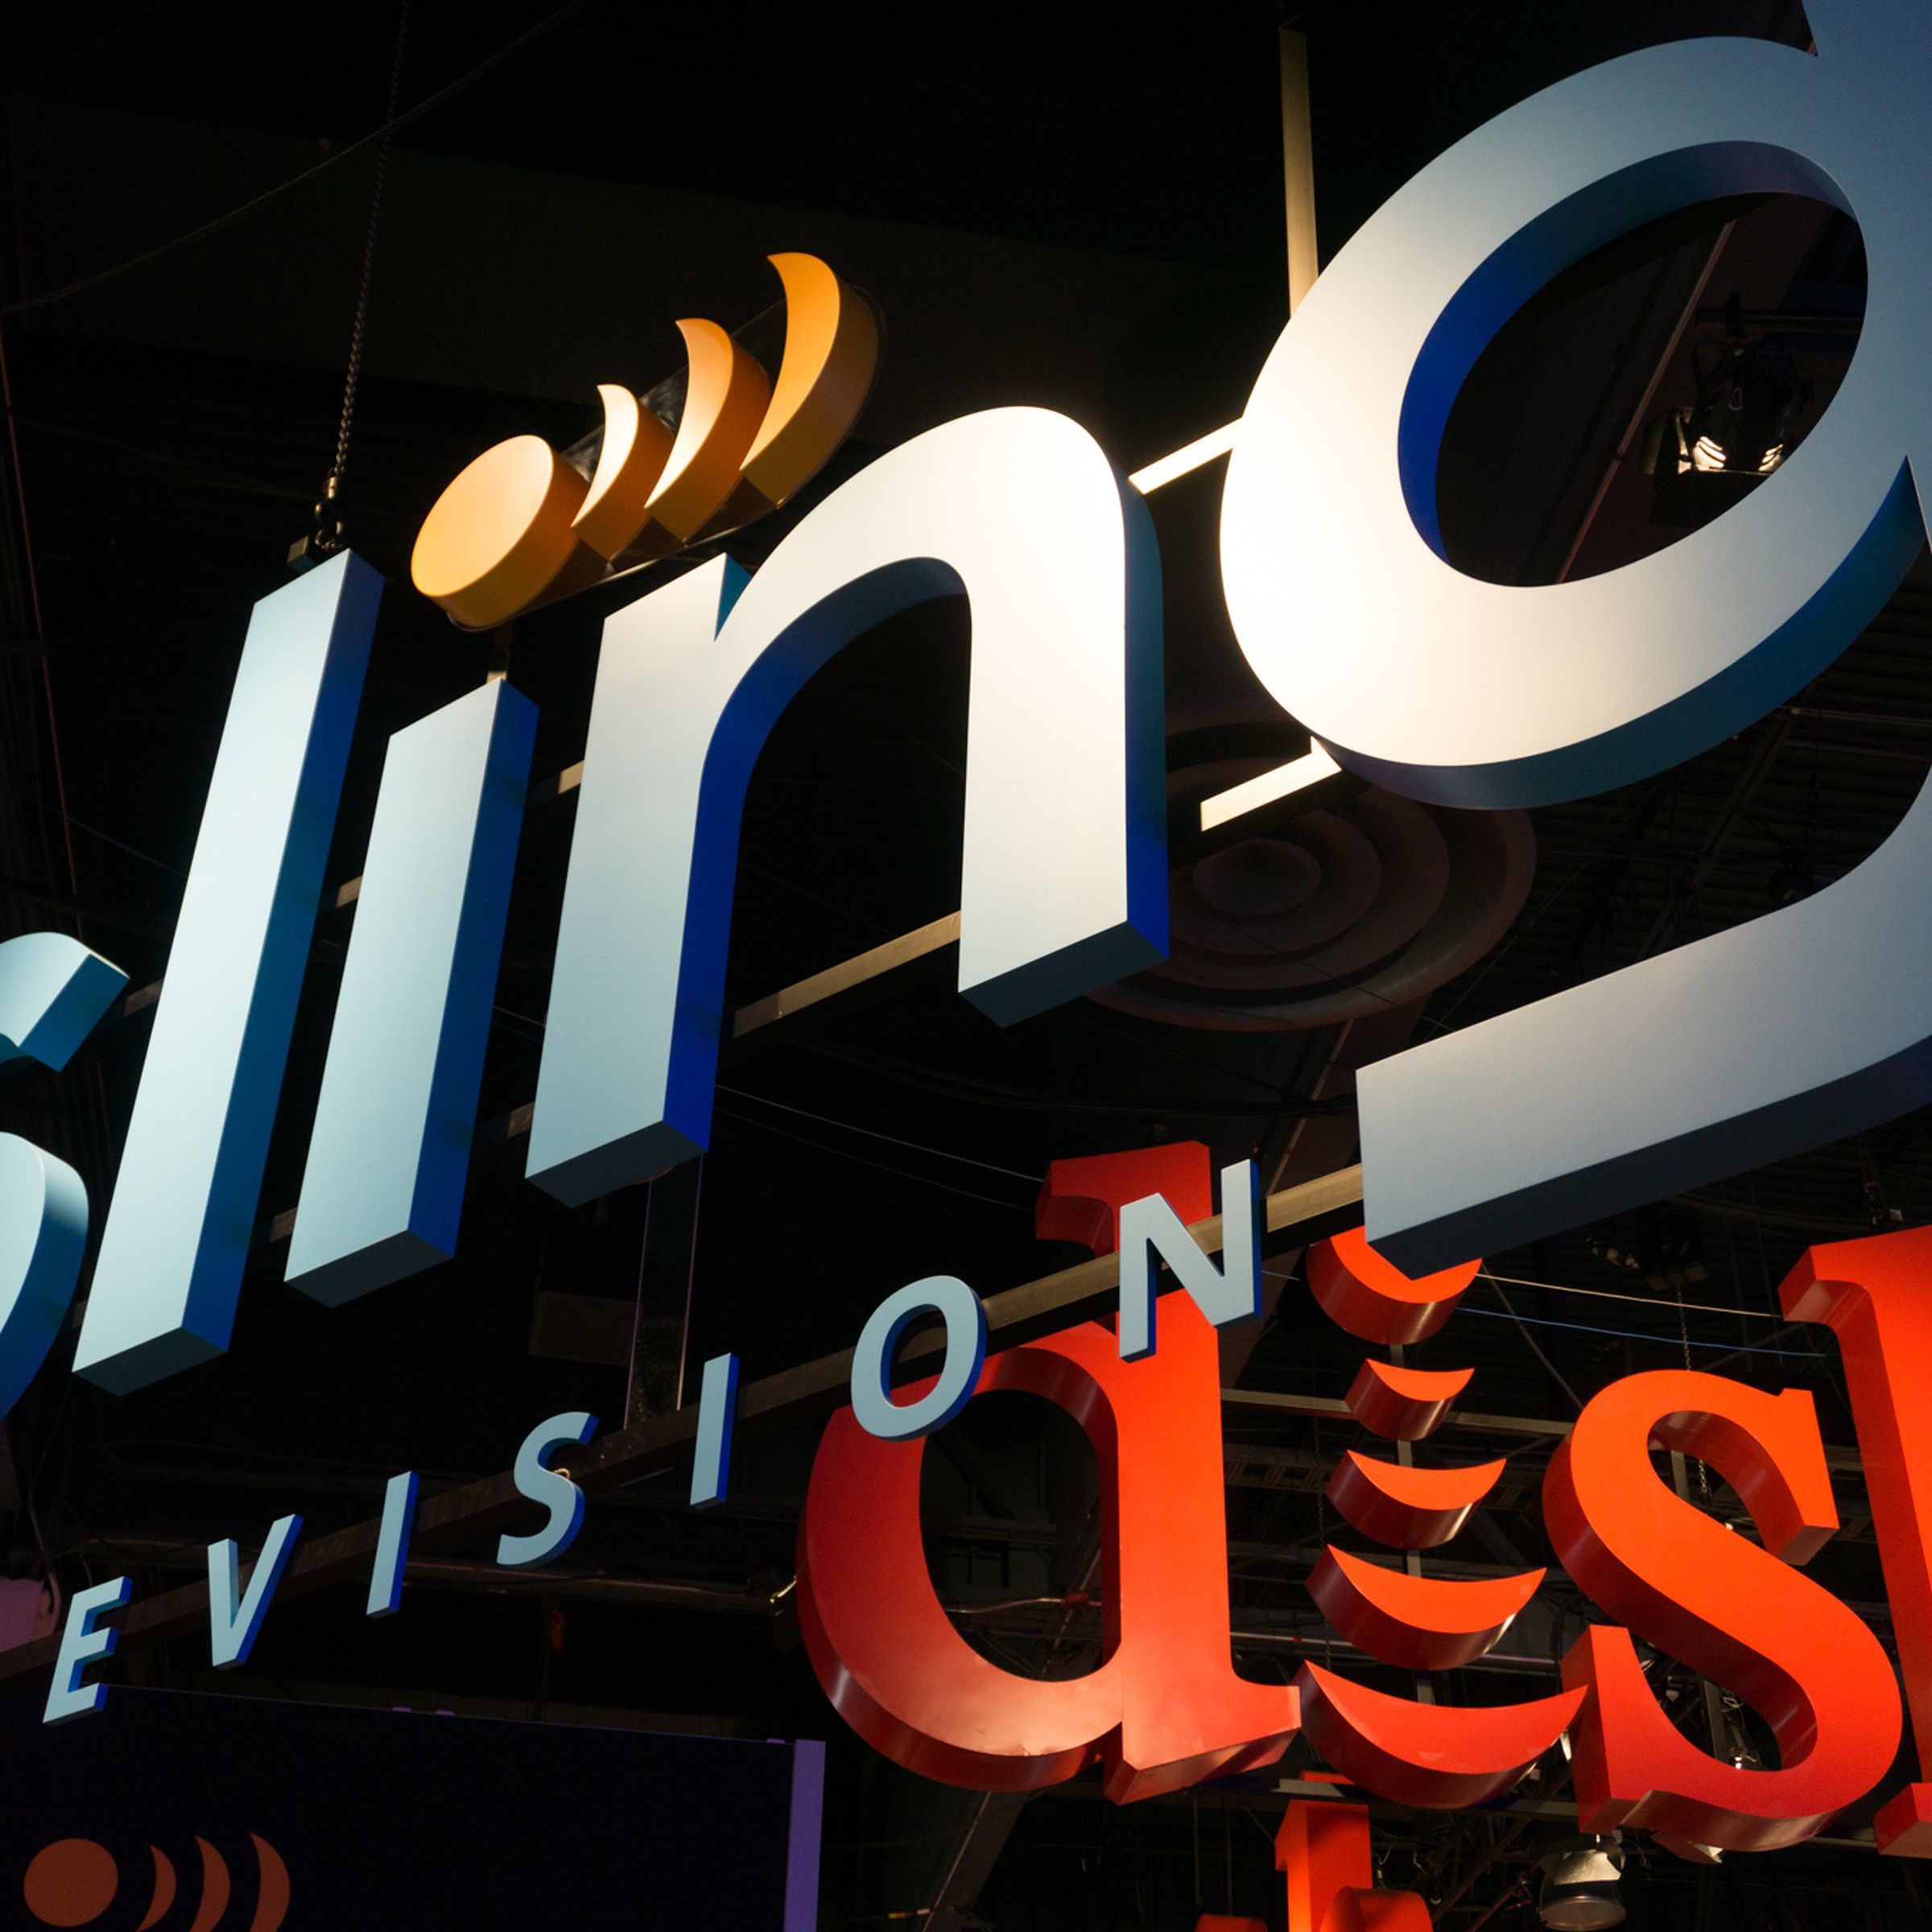 Dish owns Sling TV, and here’s a picture of their juxtaposed hanging signage with big 3D letters that we took way back during its debut in 2015.